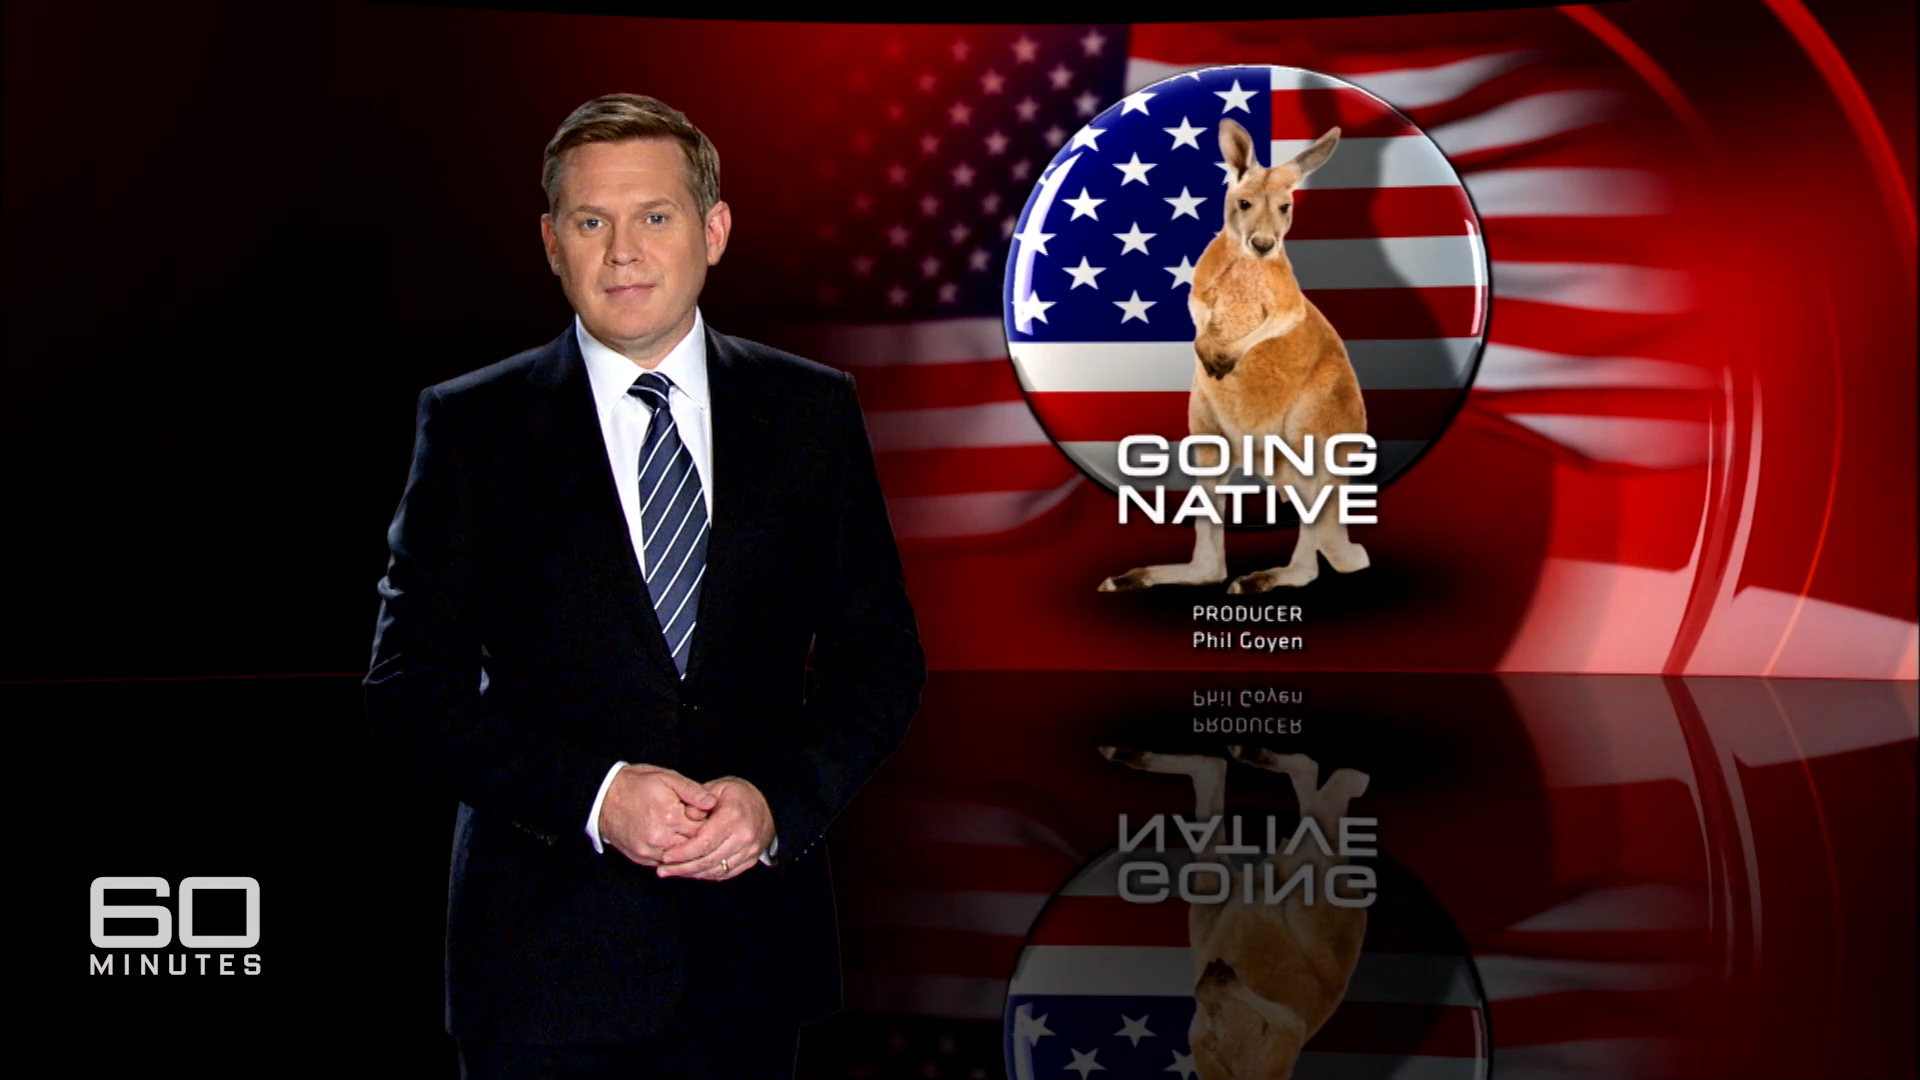 Going Native (2012)